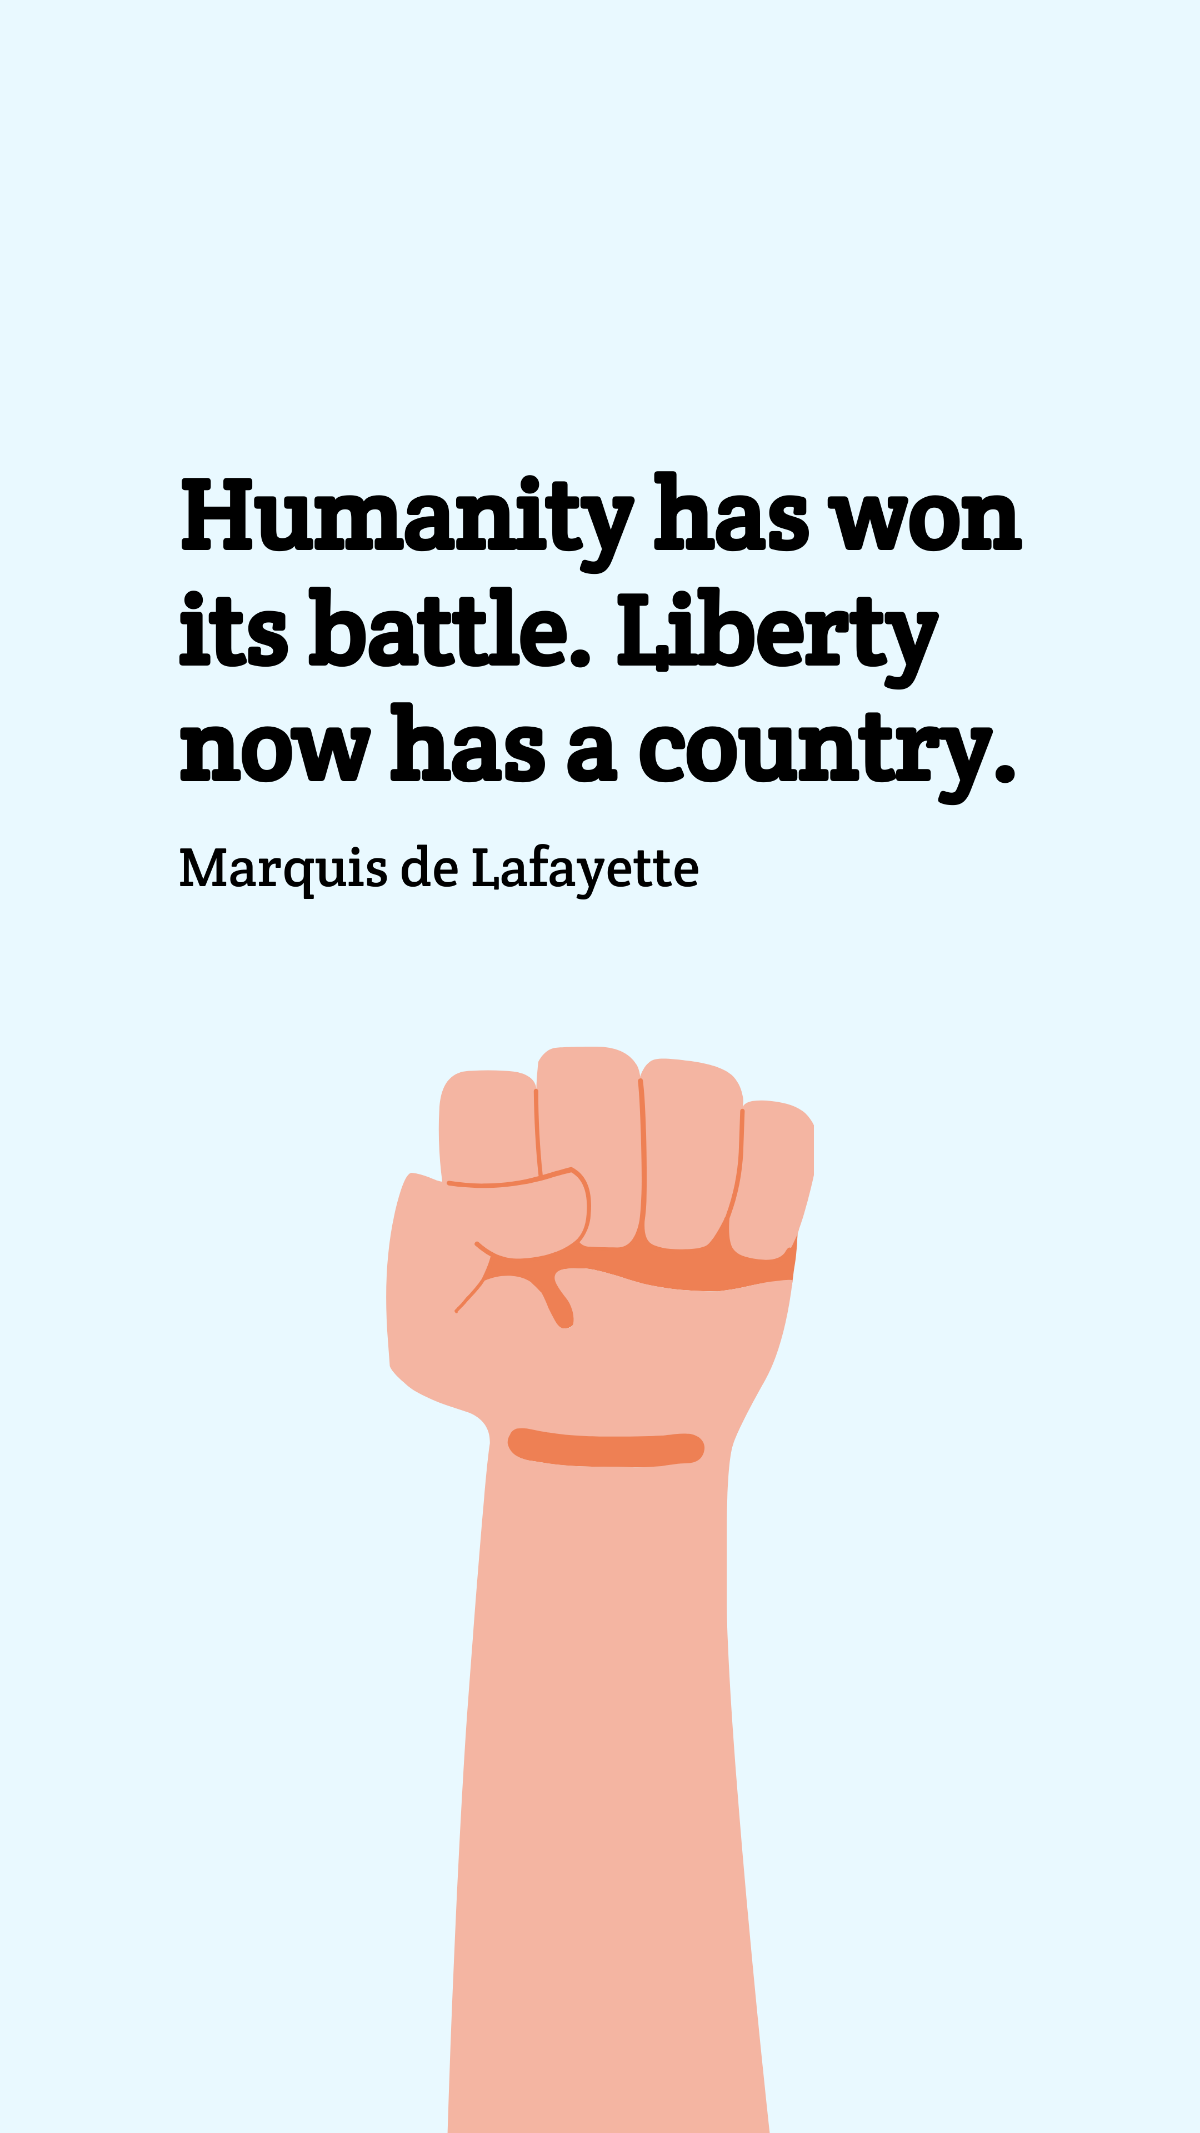 Marquis de Lafayette - Humanity has won its battle. Liberty now has a country. Template